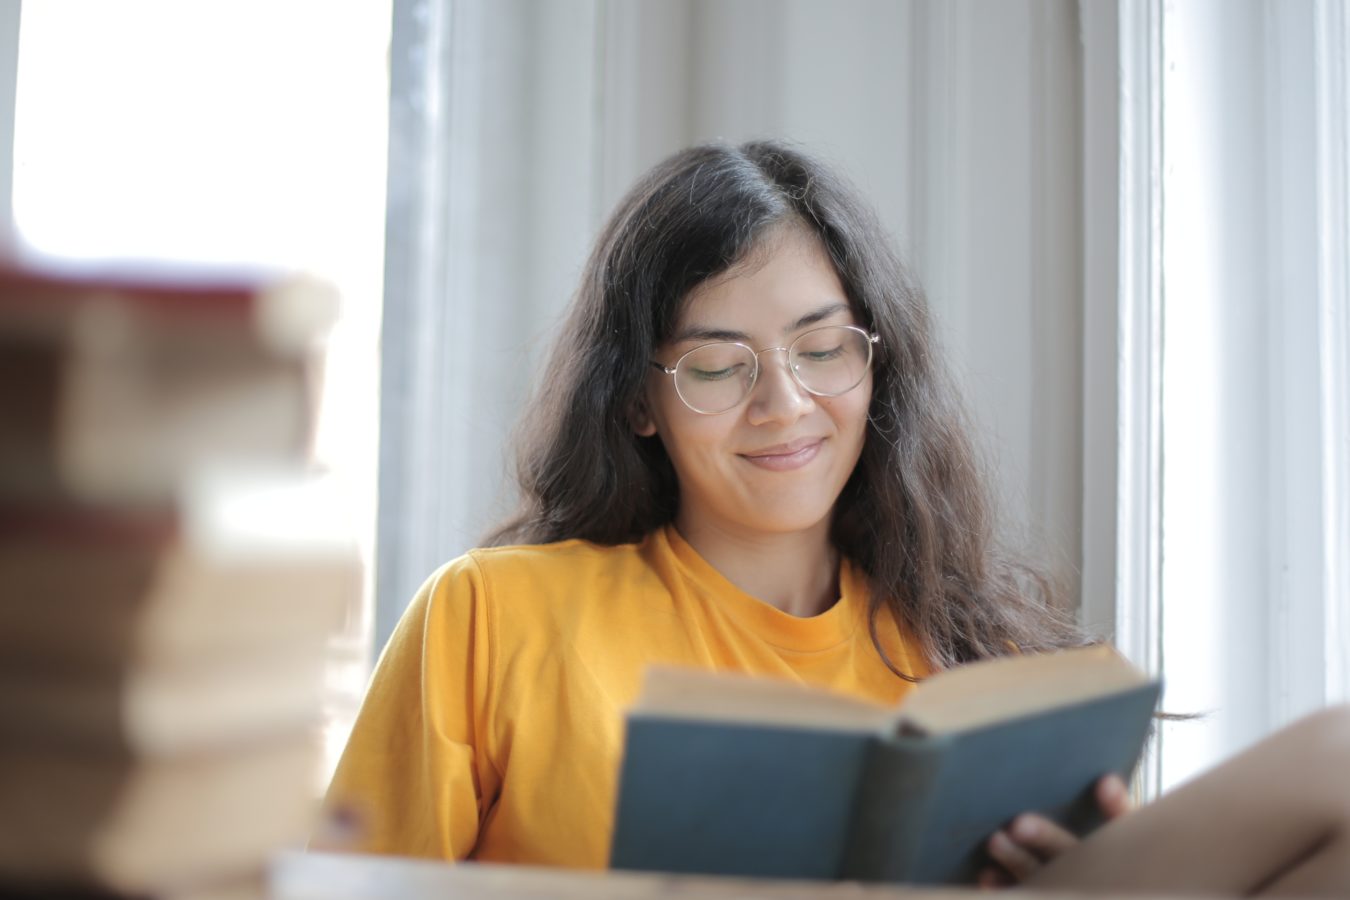 Lady with glasses on reading a book.